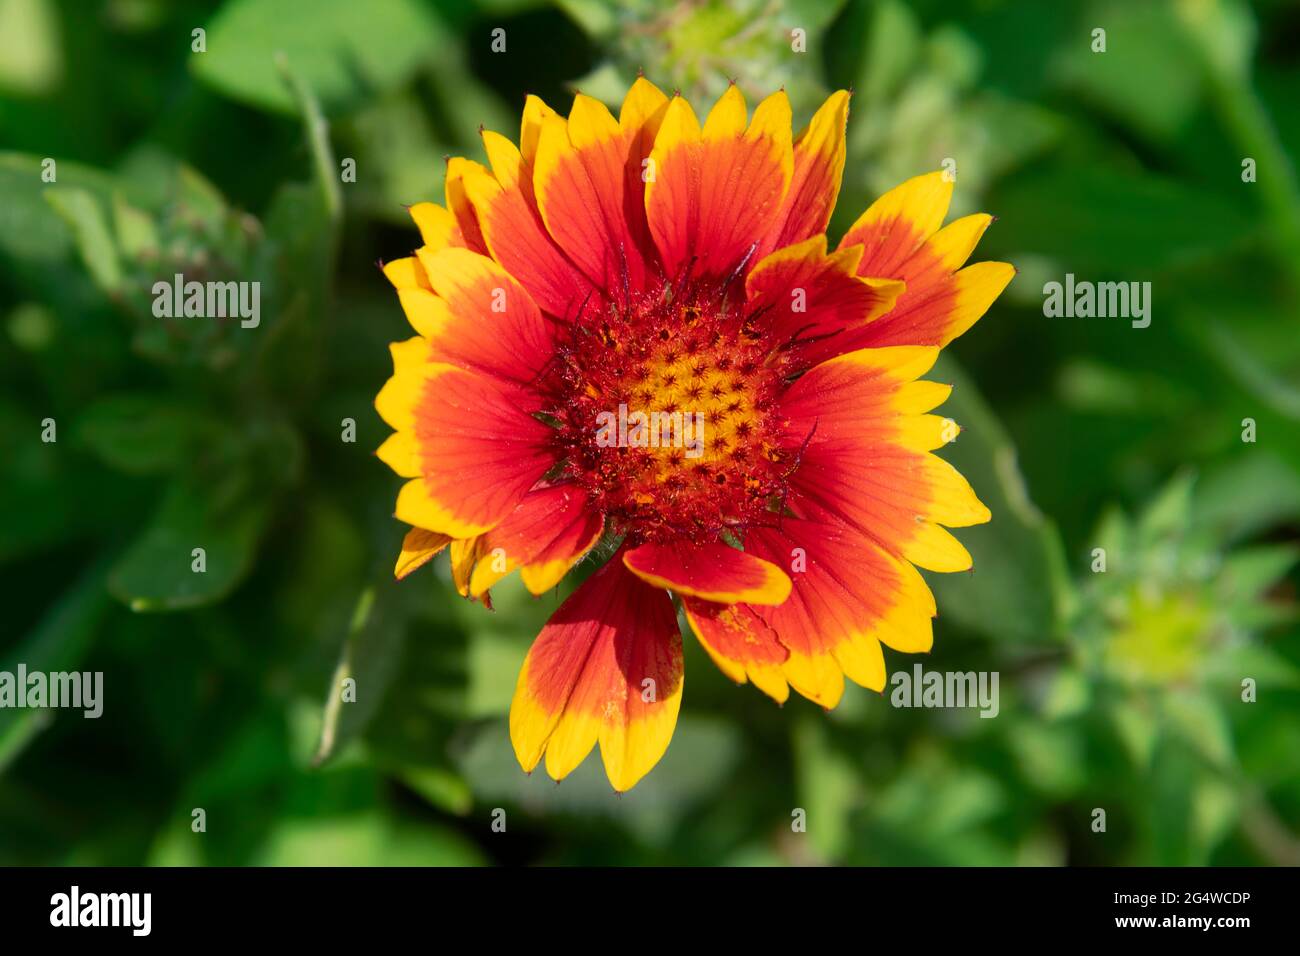 This is the colorful Goblin Gaillardia flower with its cherry red petals with yellow serrated tips. Stock Photo